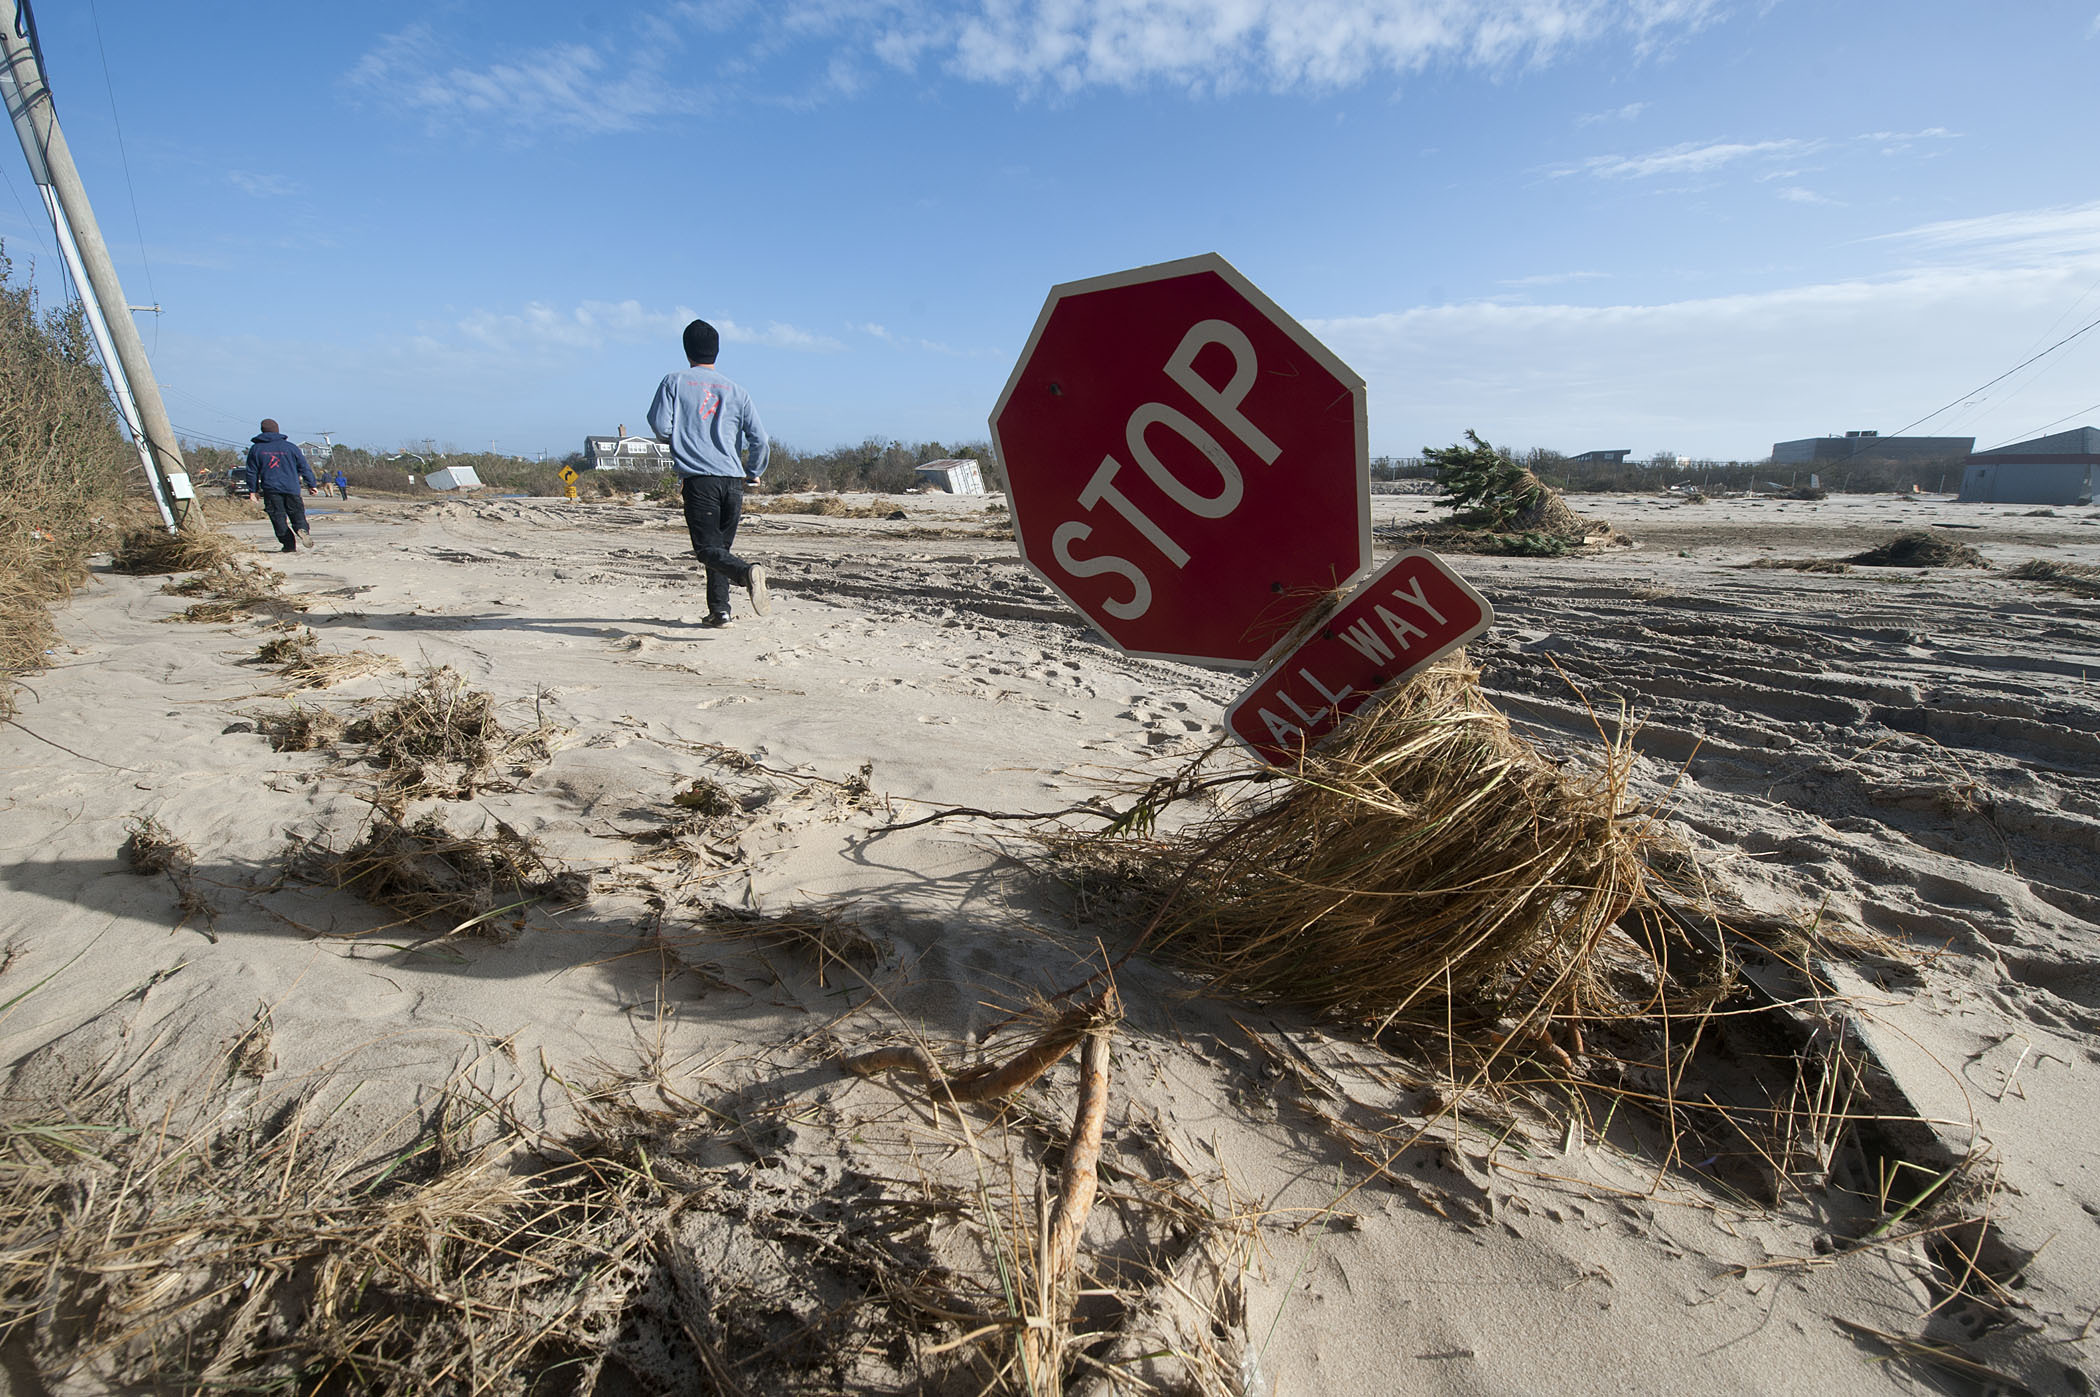 The intersection of Dune Road and Jobs Lane in Bridgehampton in the aftermath of hurricane Sandy on October 30, 2012.    MICHAEL HELLER